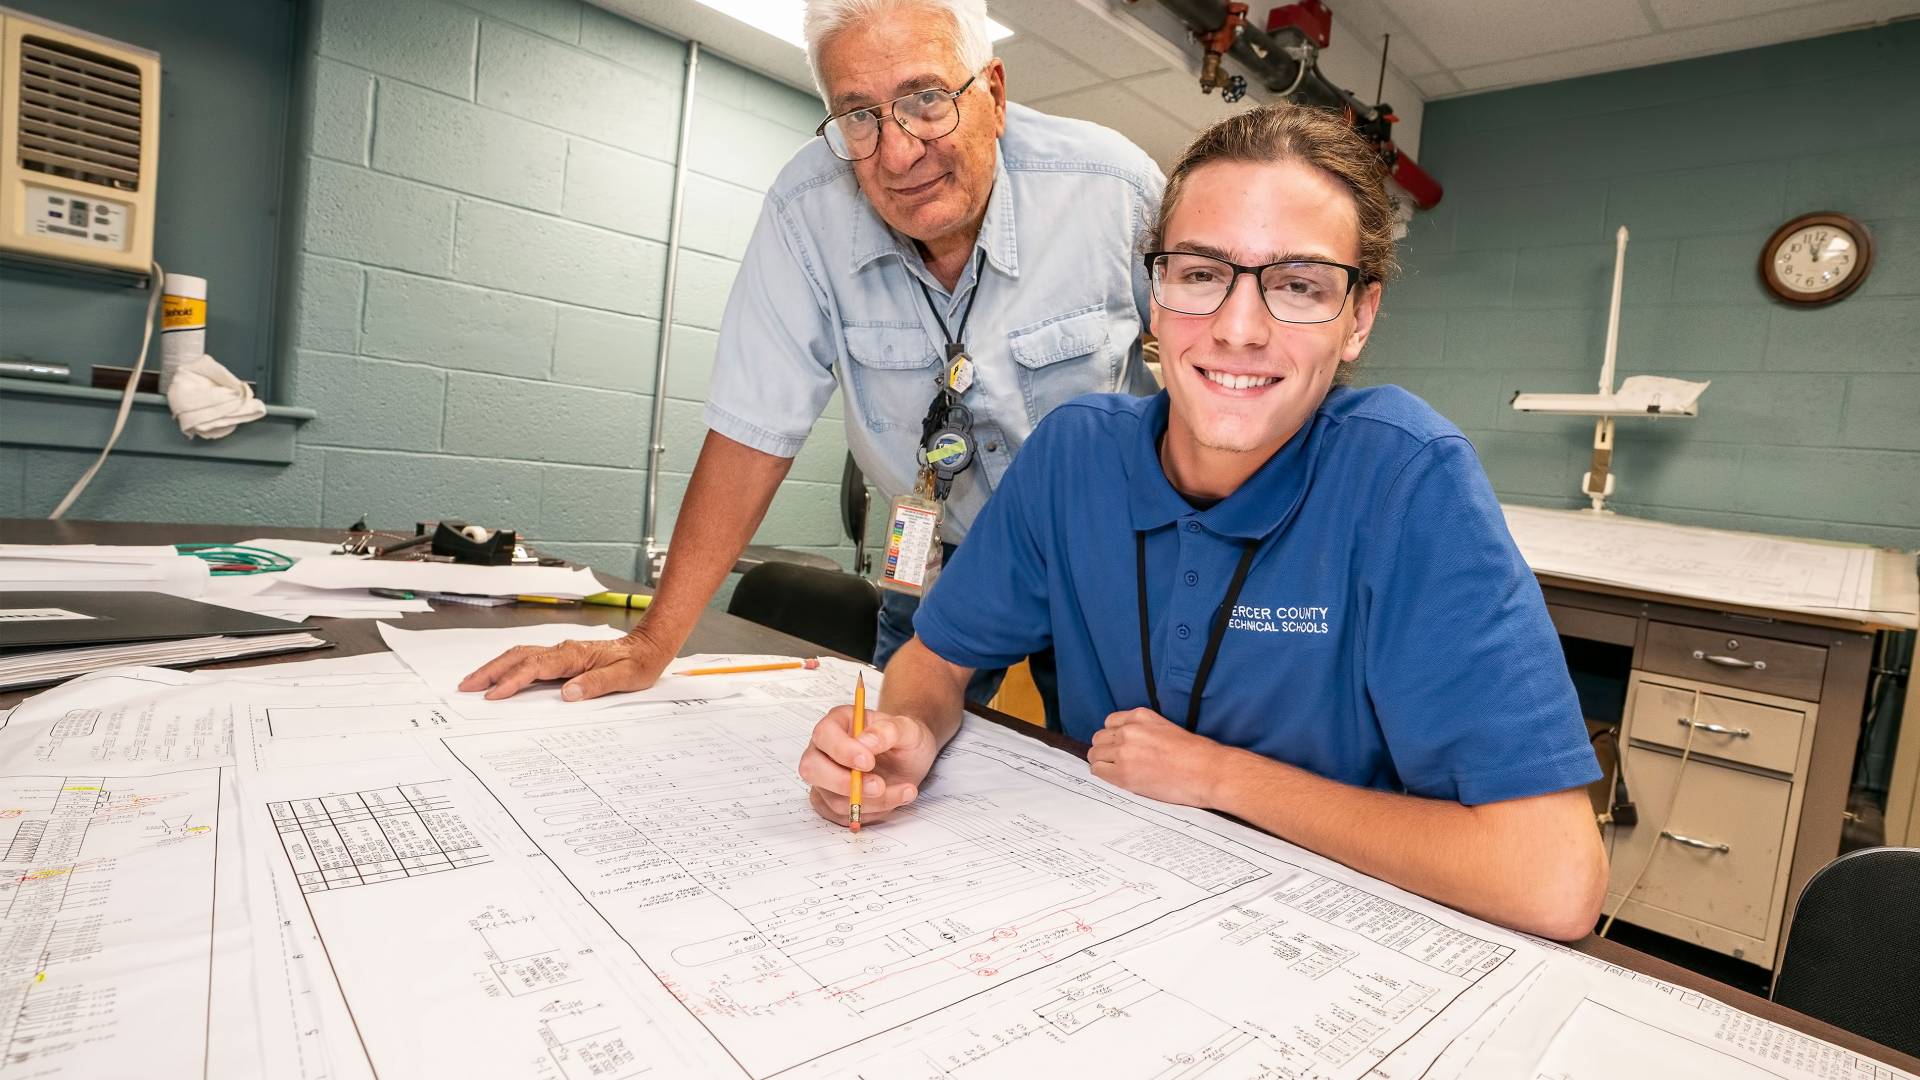 A technician and apprentice look over blueprint plans